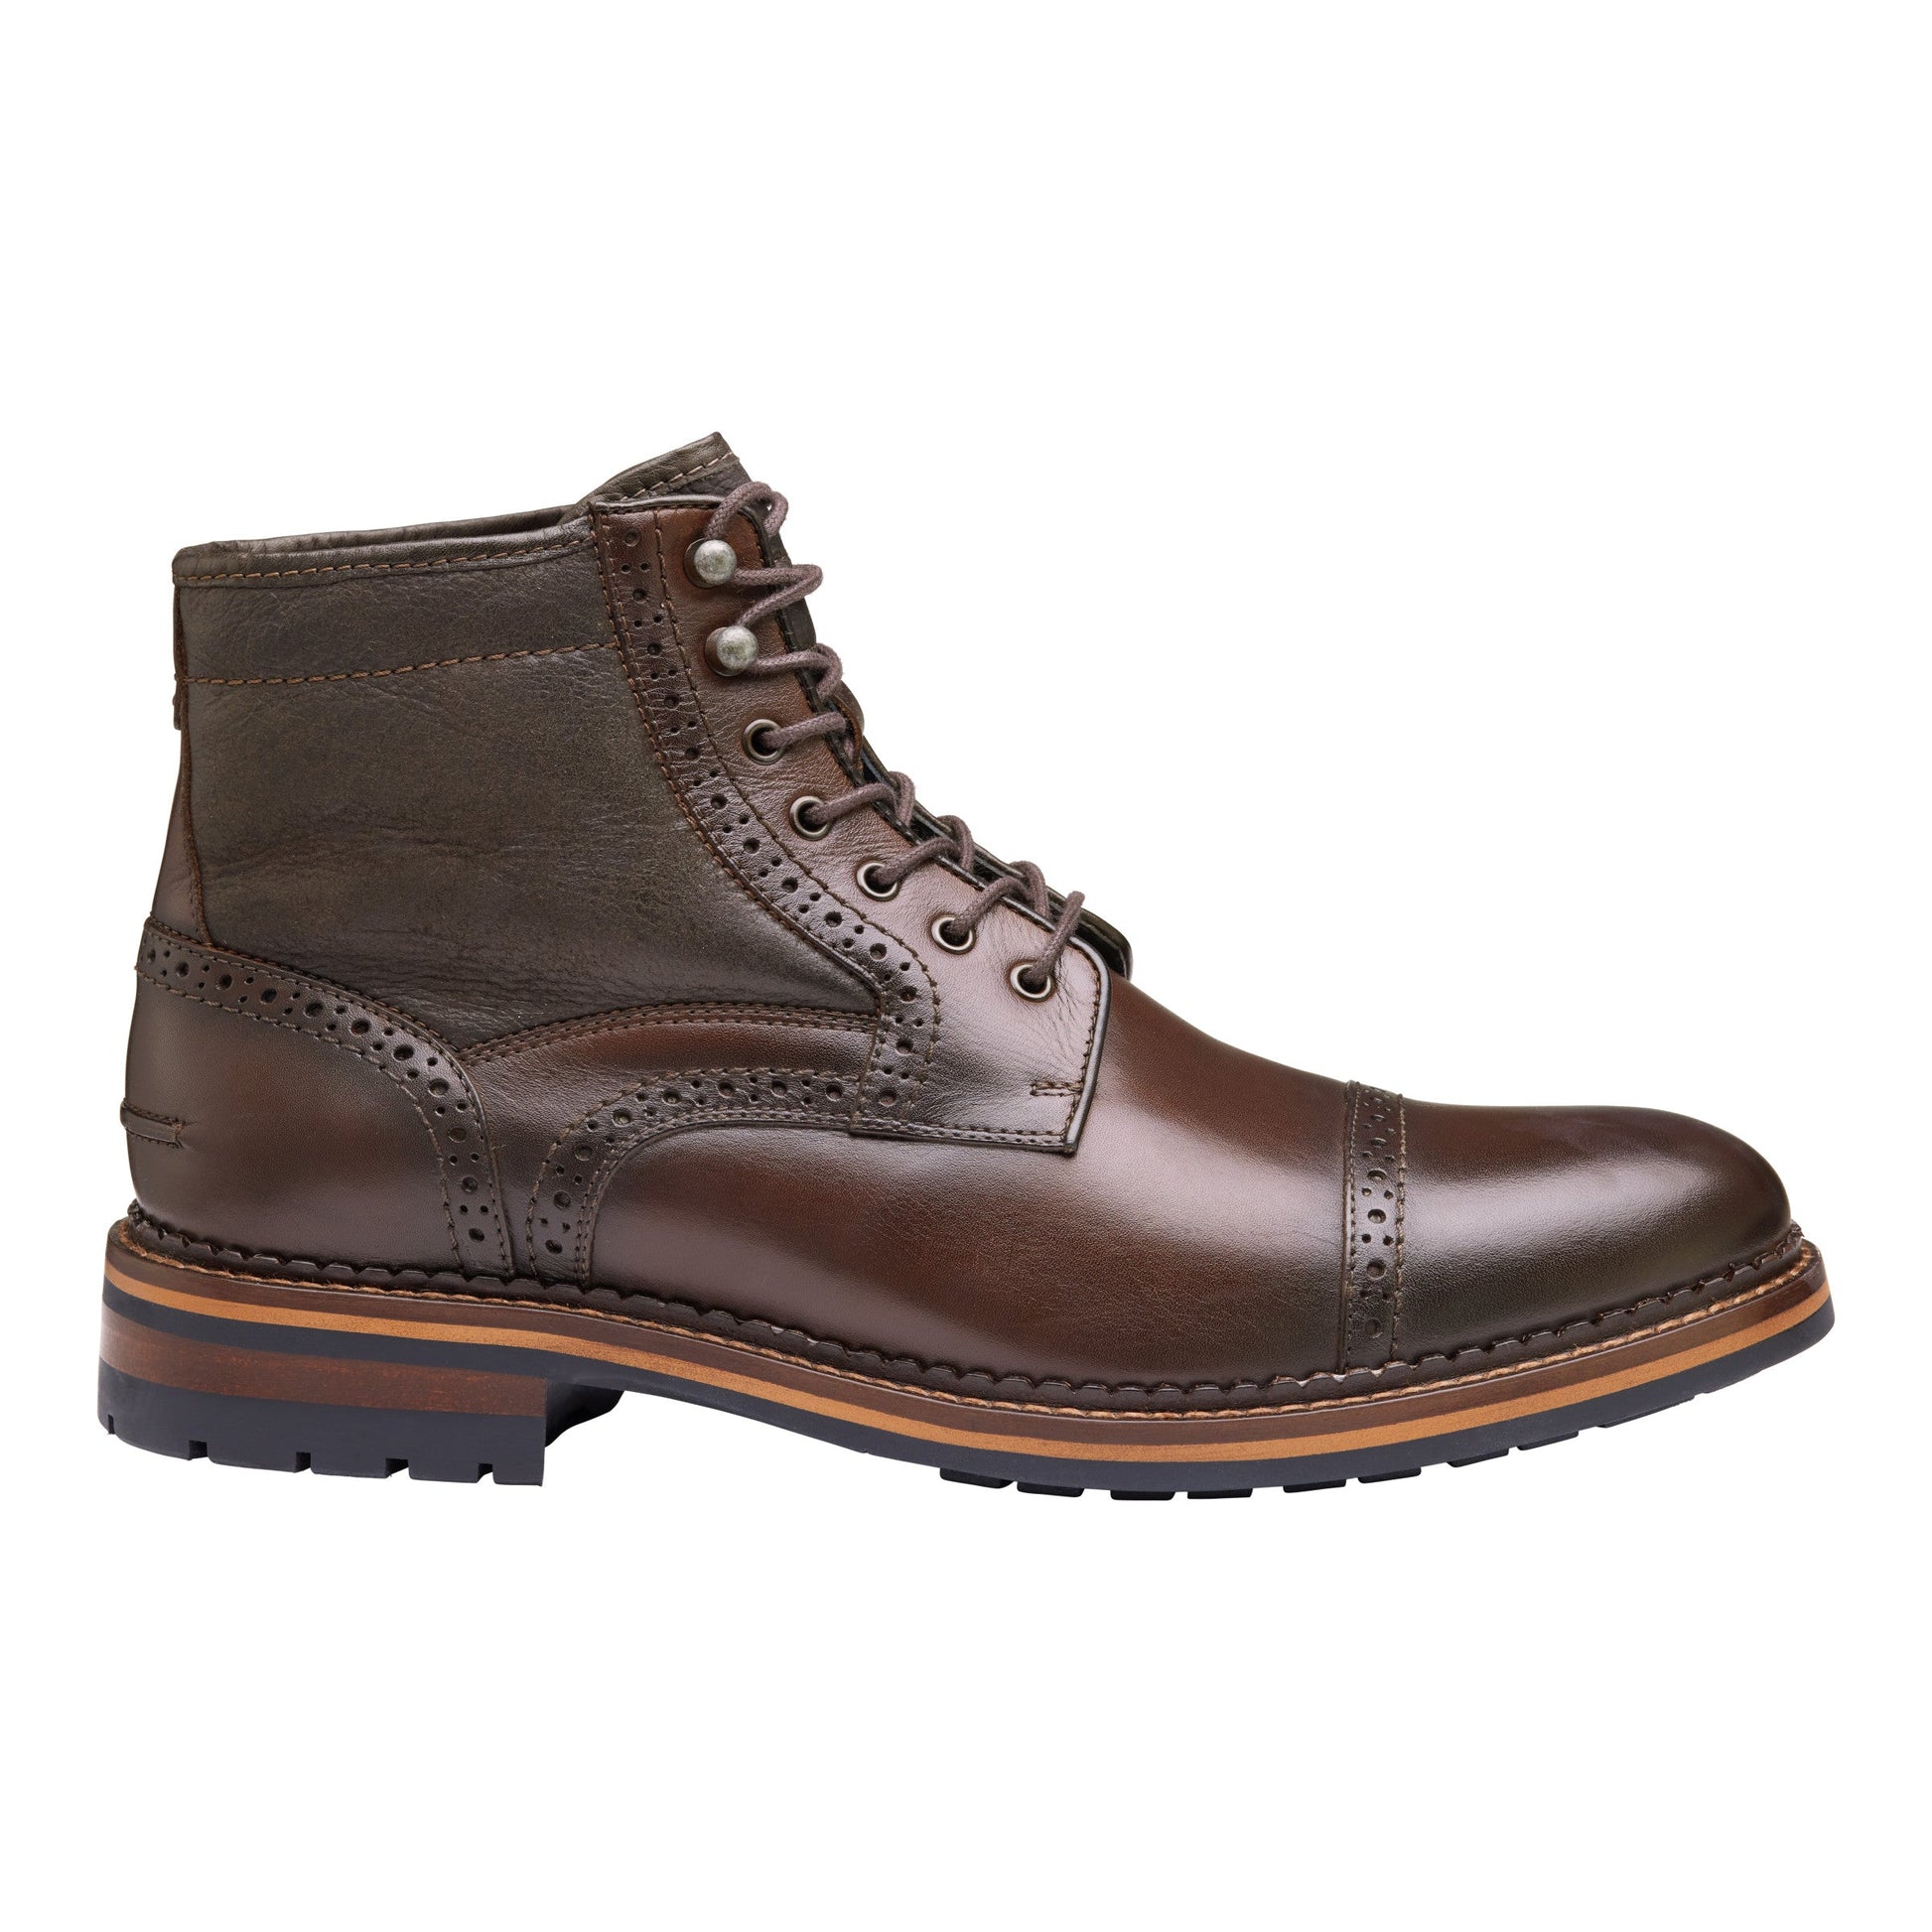 XC FLEX CONNELLY BOOT-MENS BOOTS-JOHNSTON & MURPHY-JB Evans Fashions & Footwear